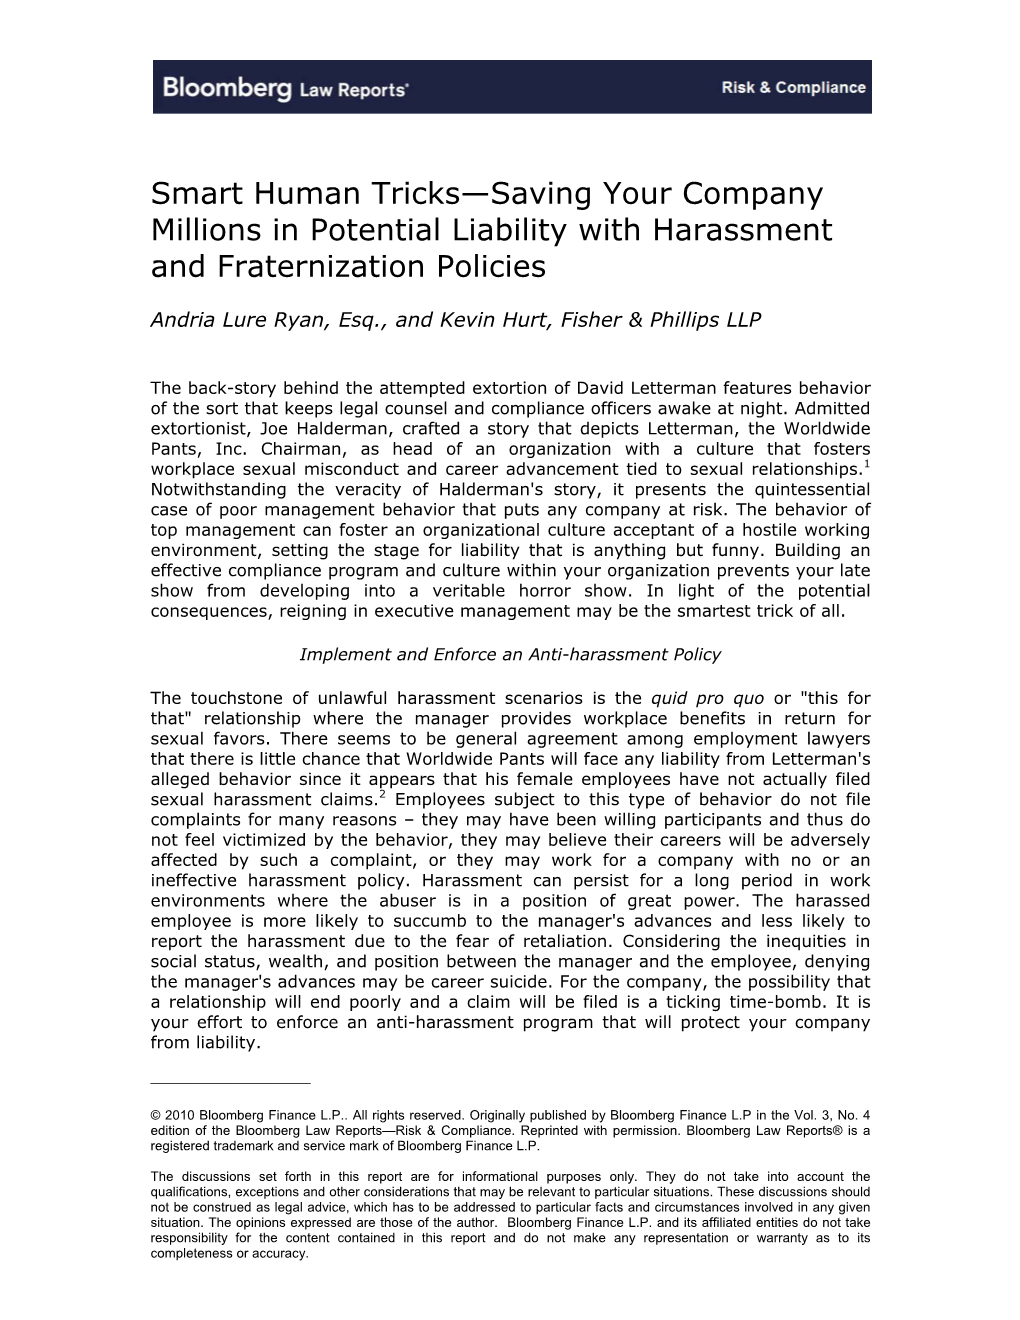 Smart Human Tricks—Saving Your Company Millions in Potential Liability with Harassment and Fraternization Policies